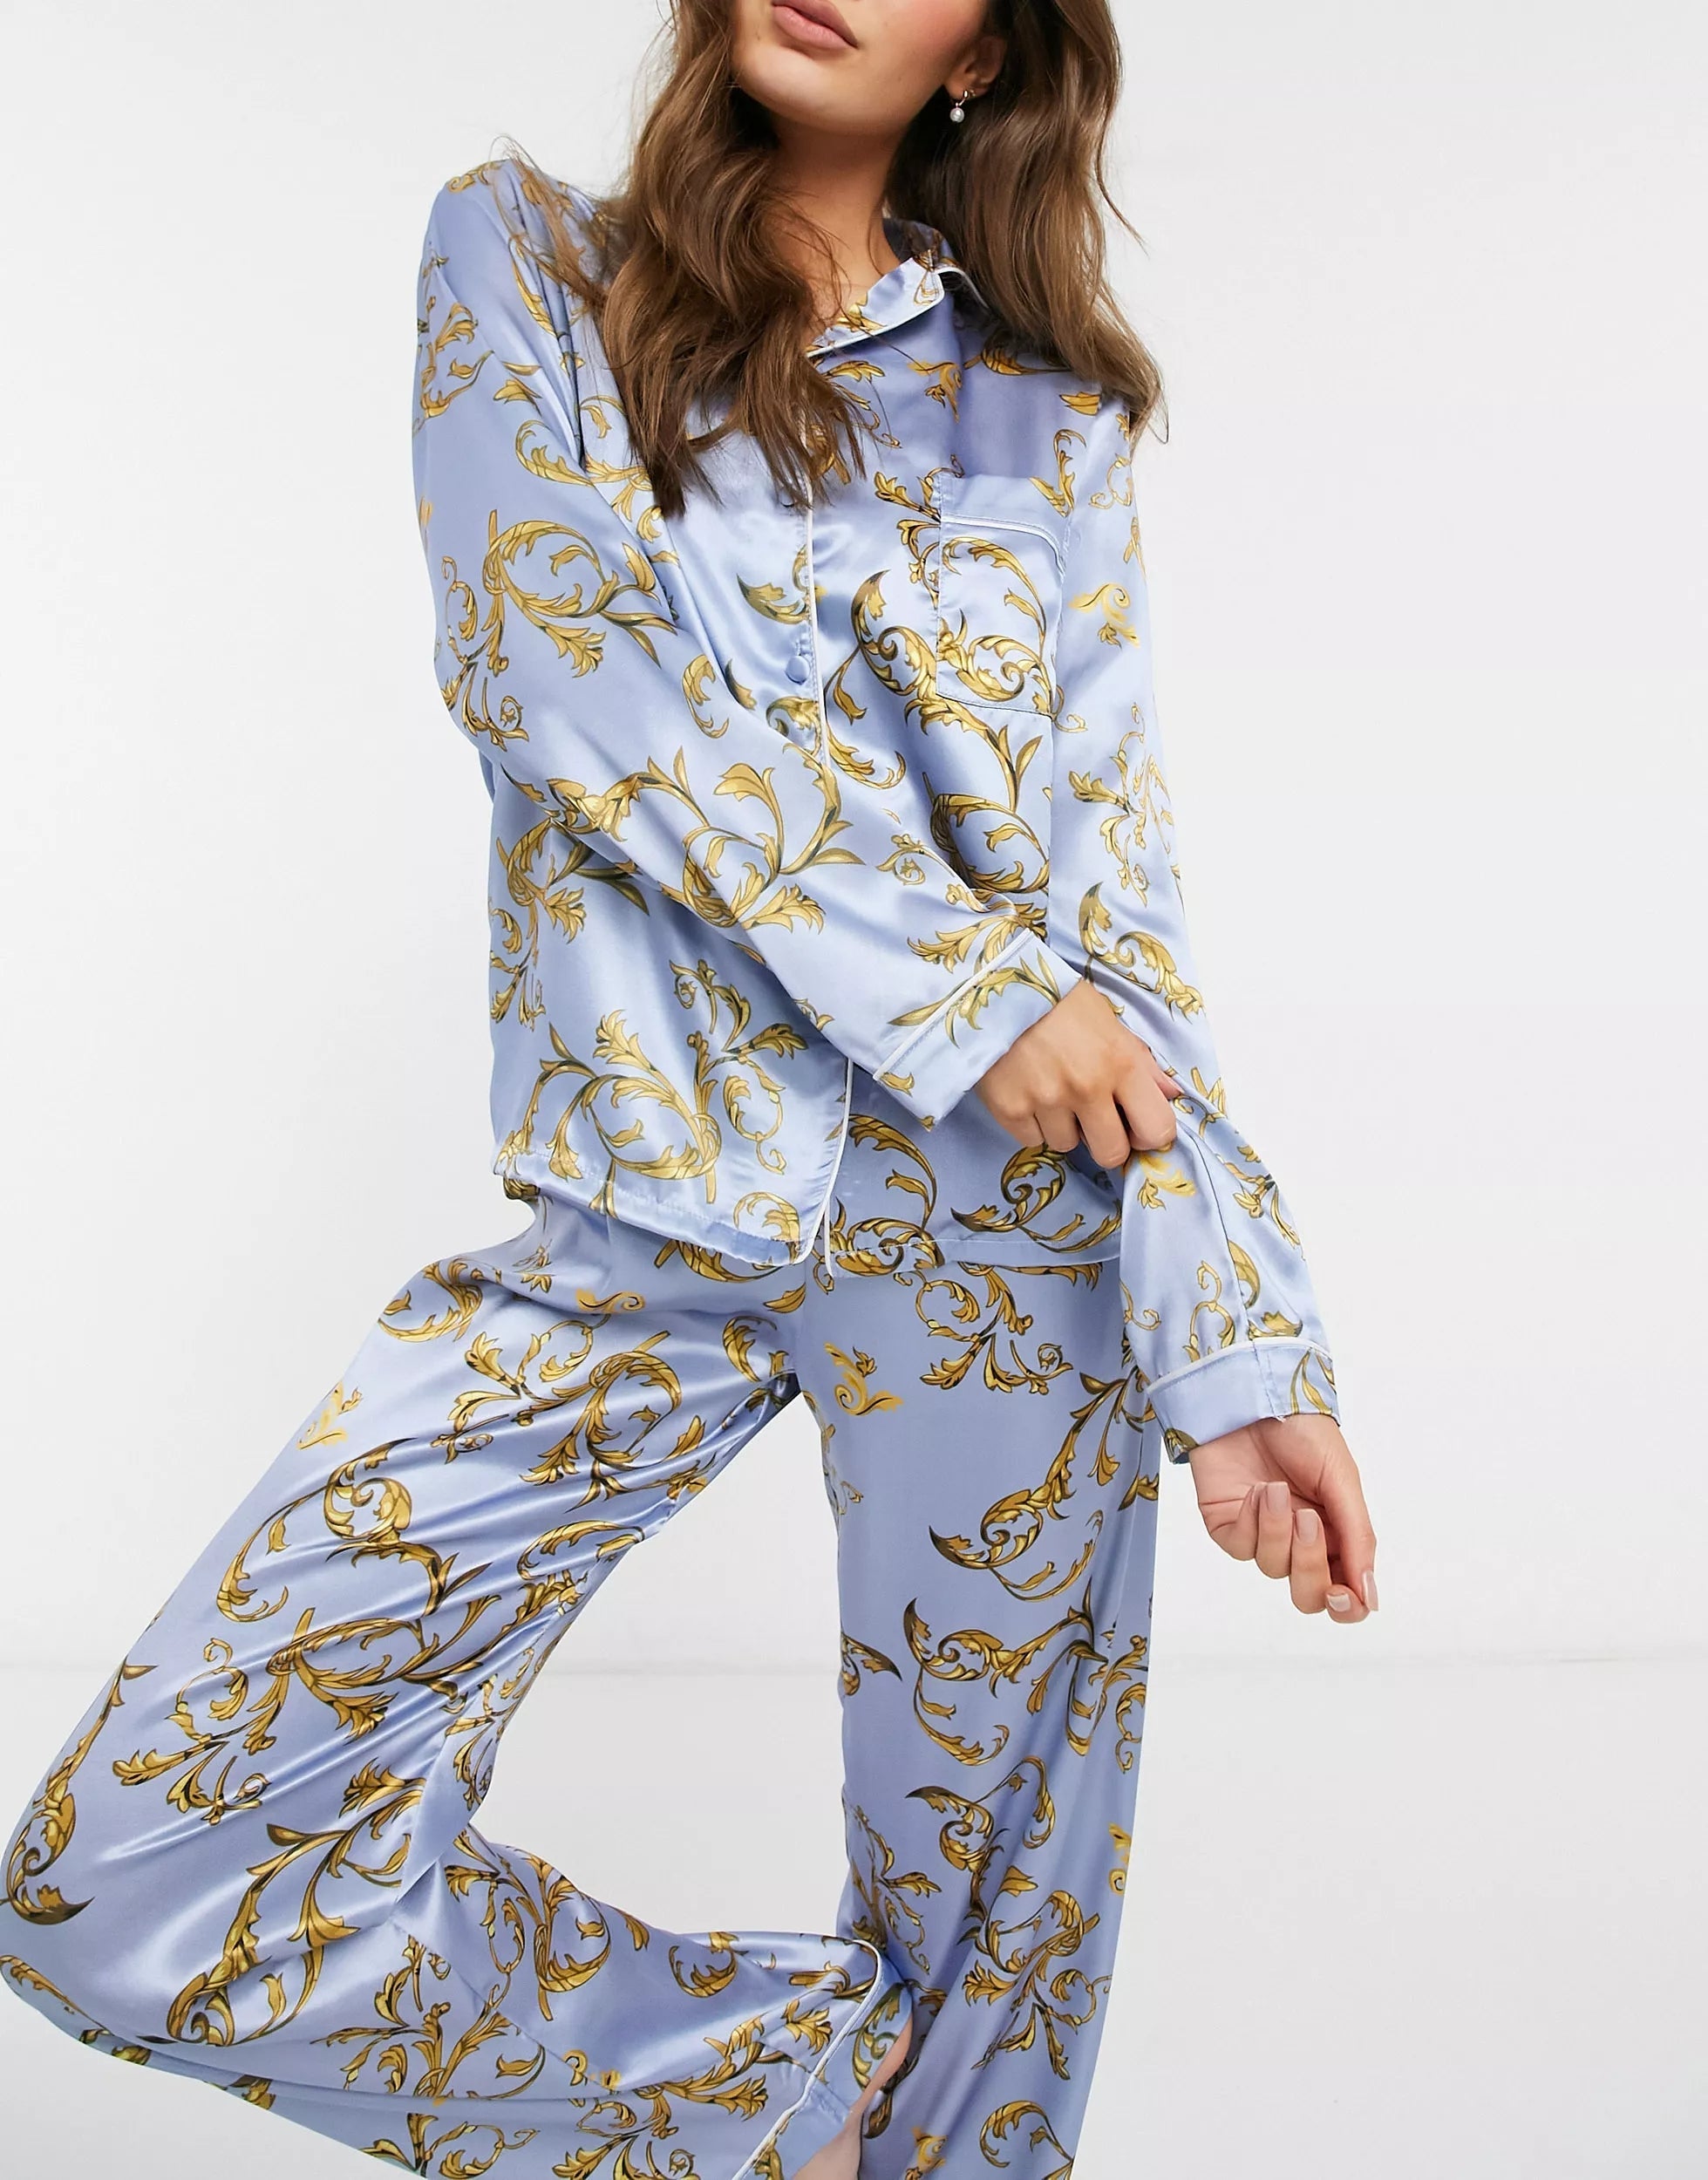 Lavender Color Digital Abstract Printed loungewear/Nightsuit For Women With Pants.